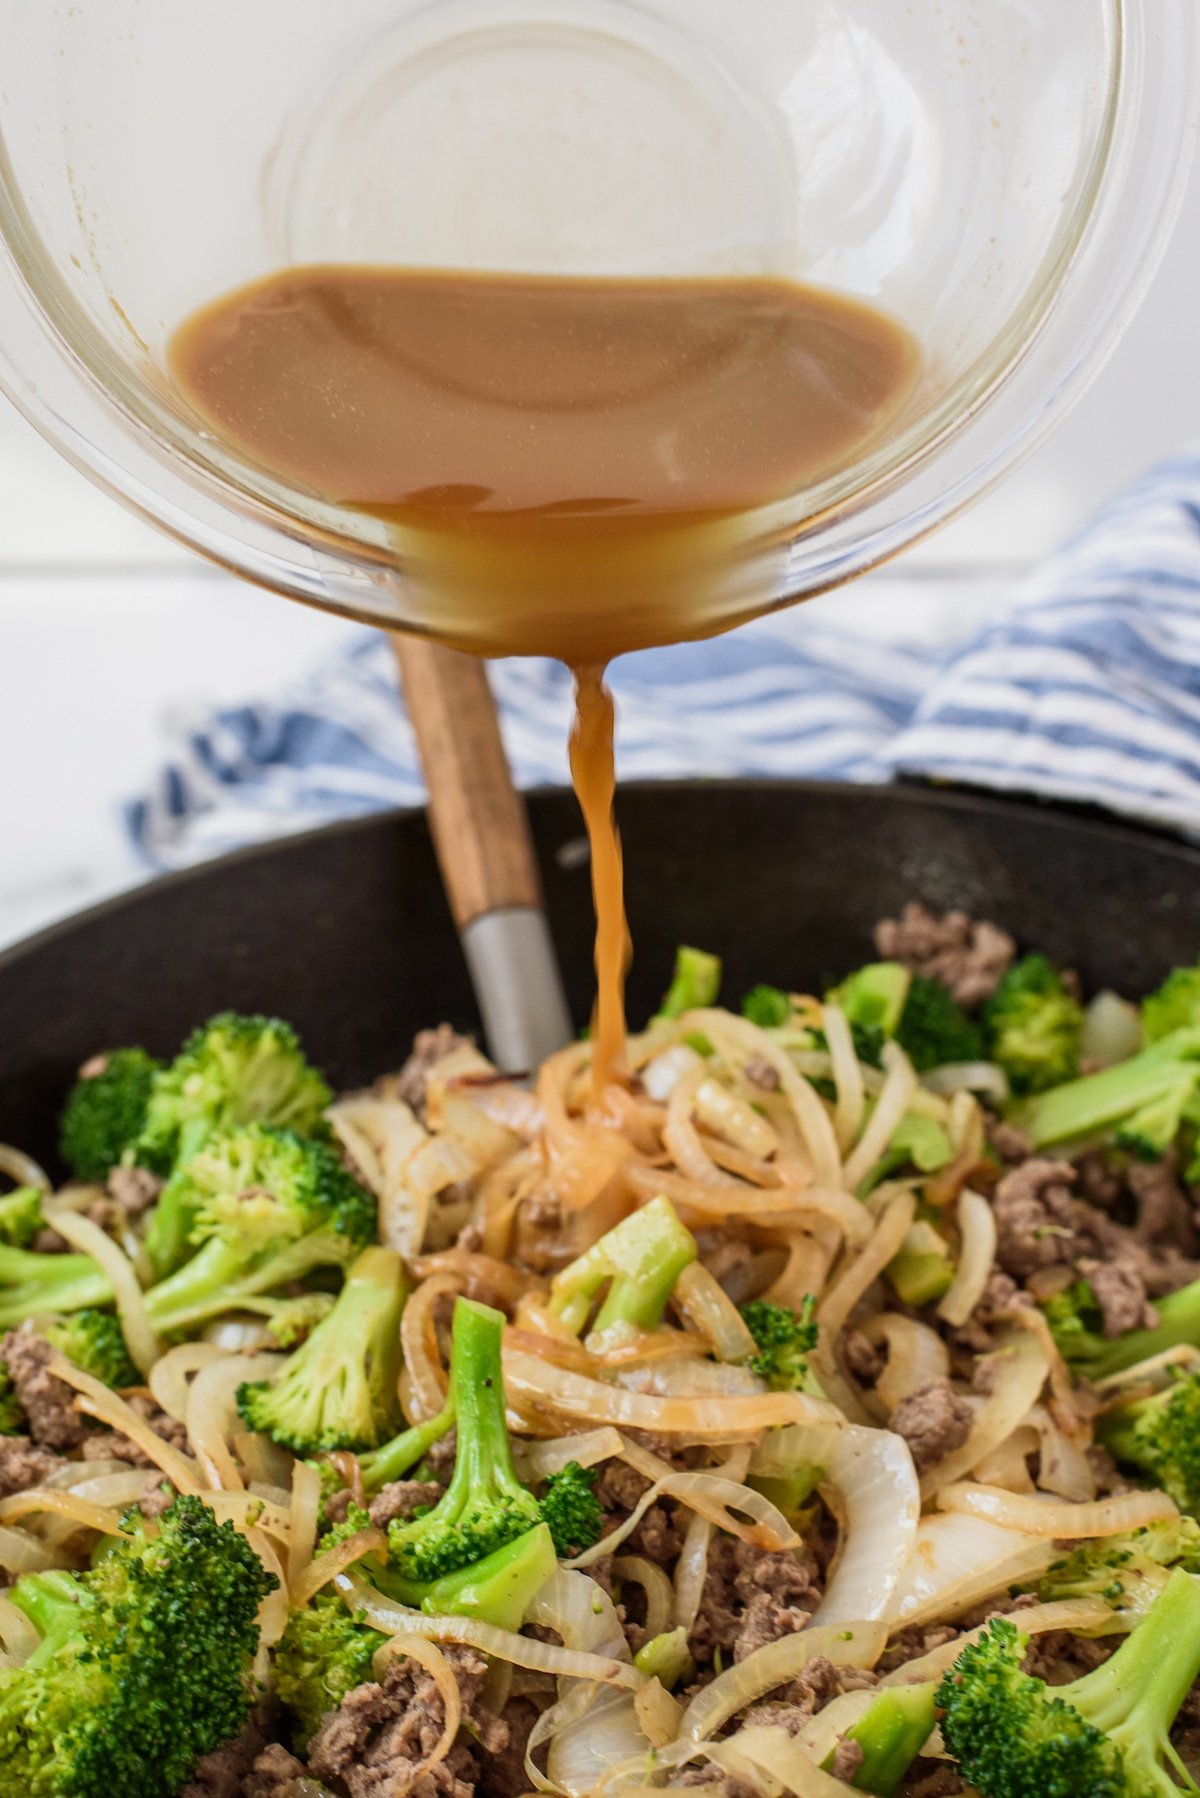 beef, broccoli and other things mixed together in a black pan with sauce being poured in